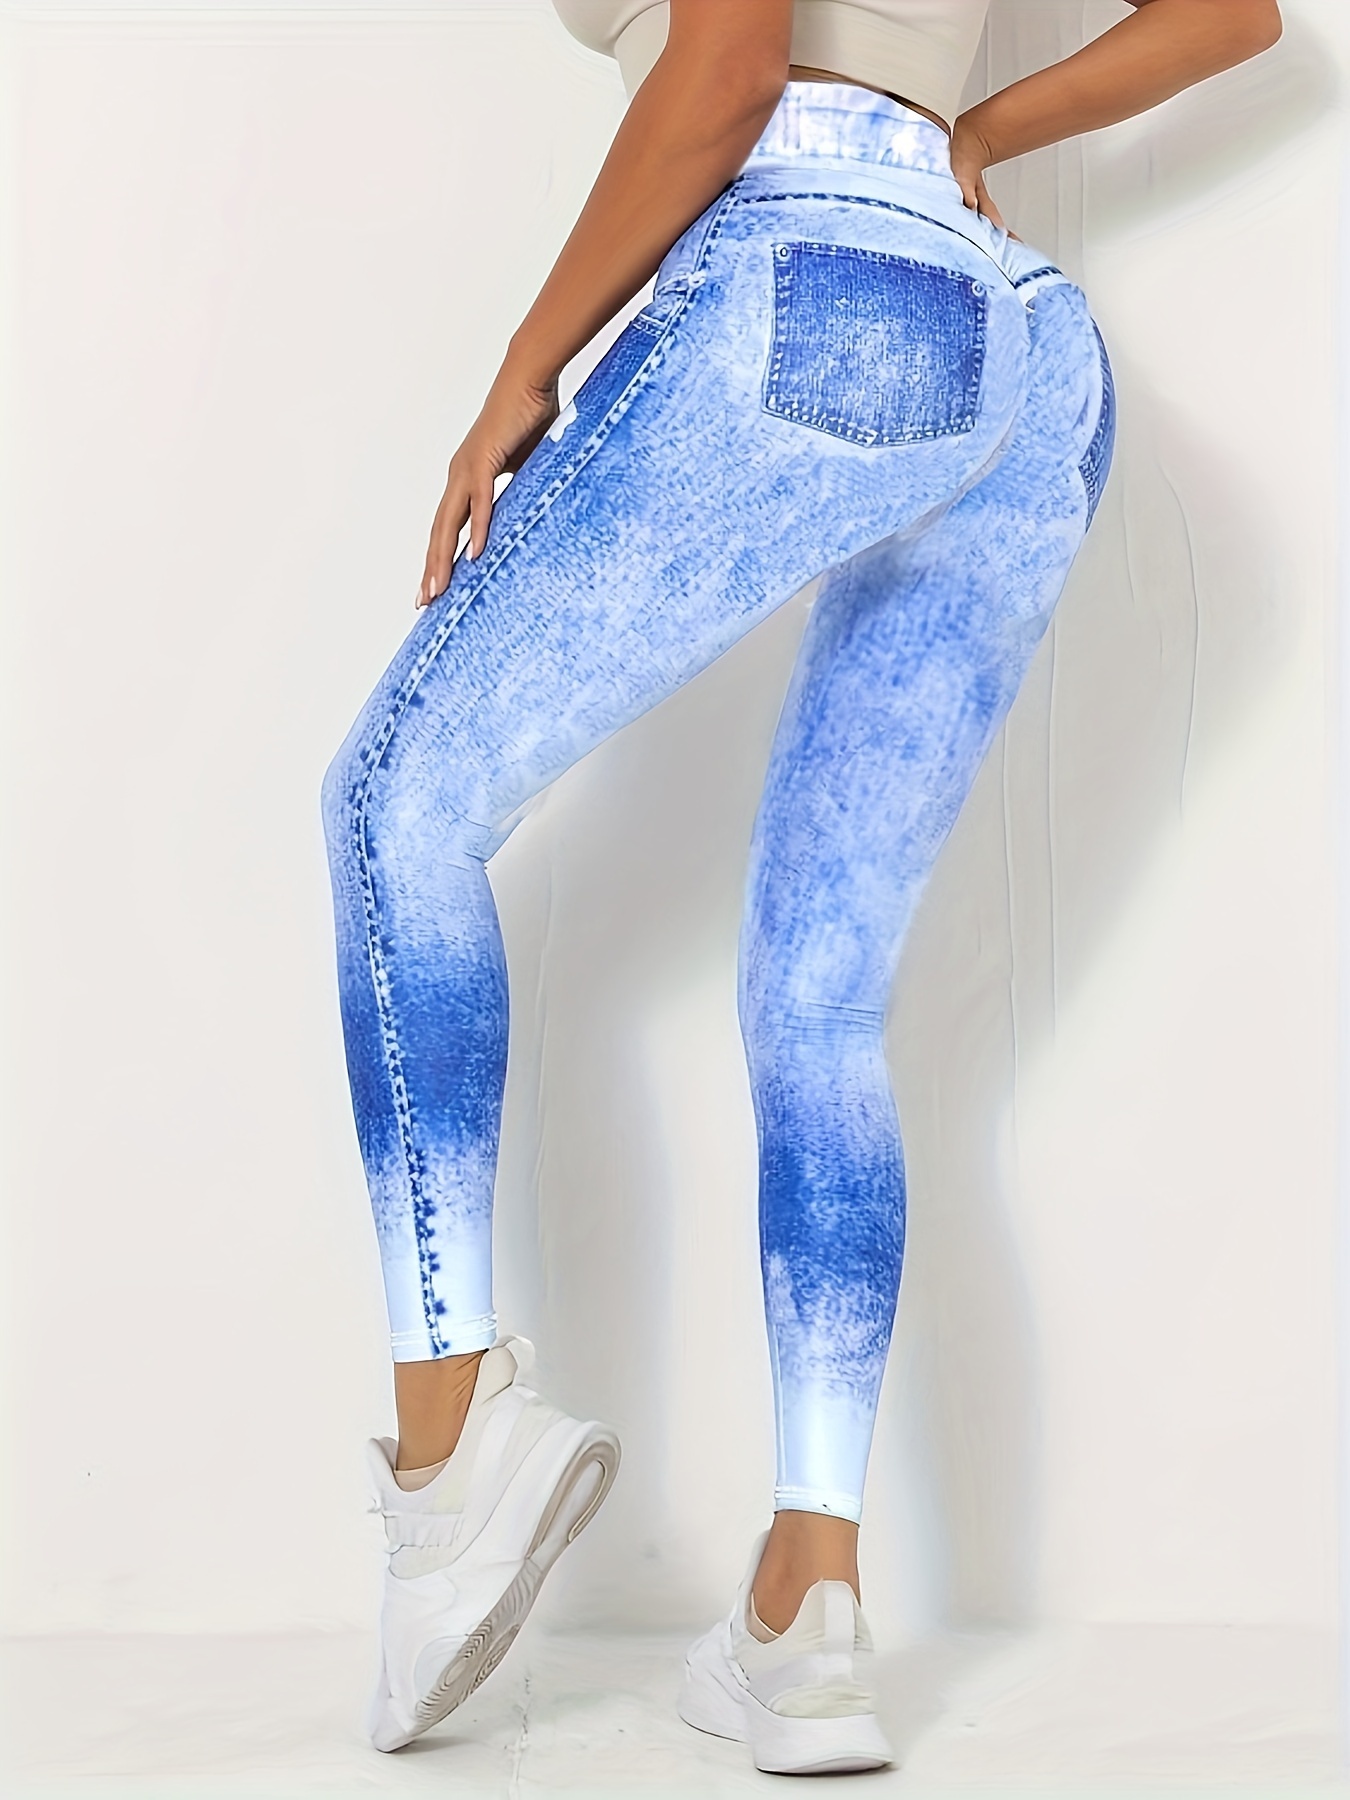 Plus Size Clothes for Women Women's Denim Print Jeans Look Like Leggings  Sexy Stretchy High Butt (Light Blue, S) at  Women's Jeans store